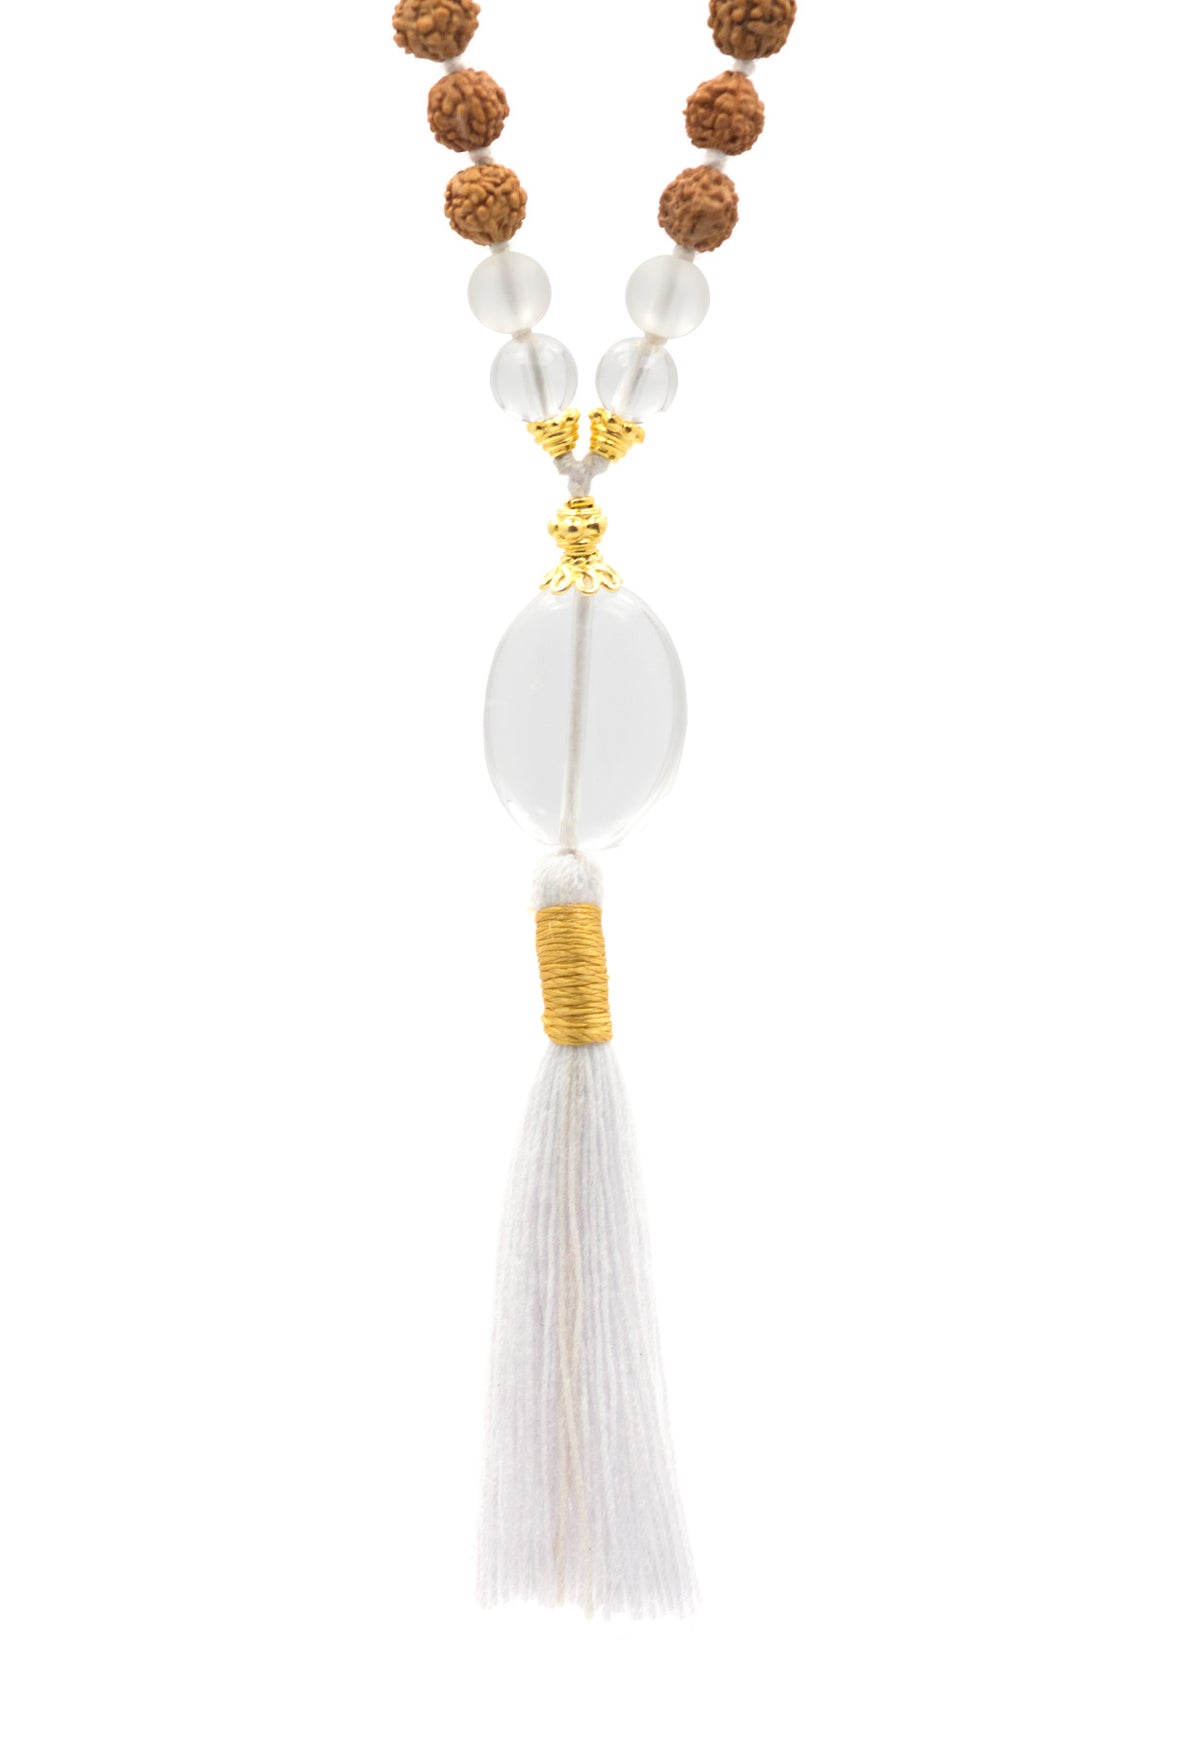 THE CROWN CHAKRA MALA FOR HIM